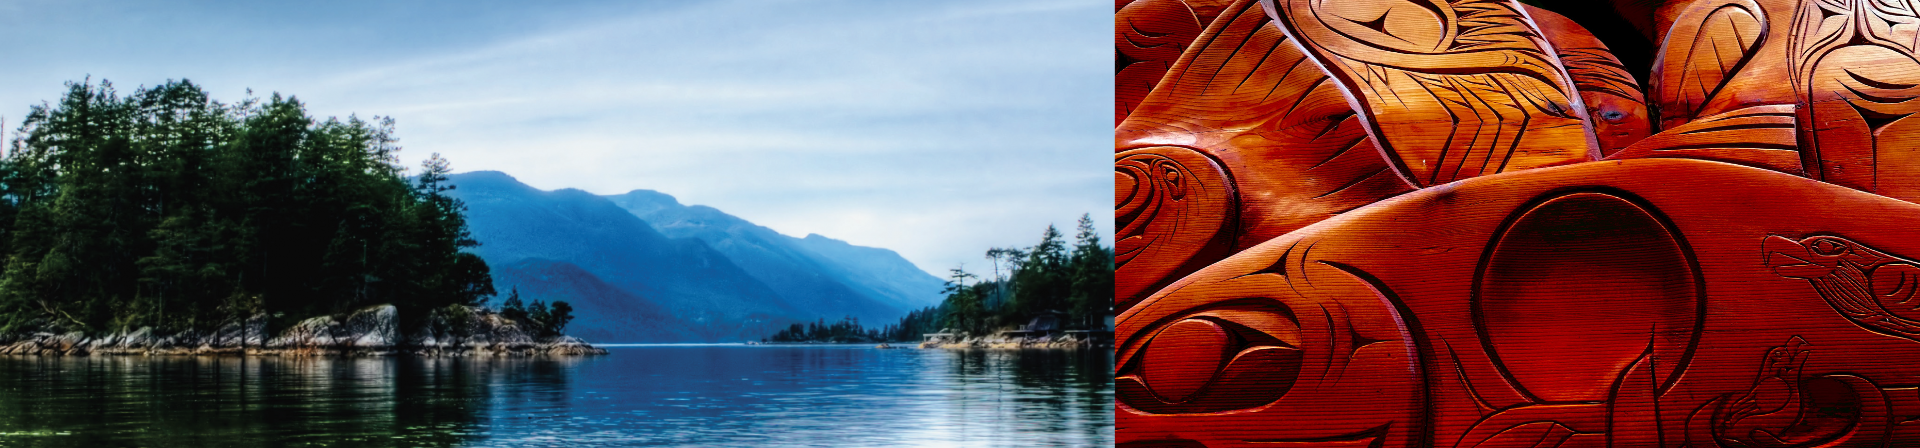 British Columbia Assembly of First Nations (BCAFN)